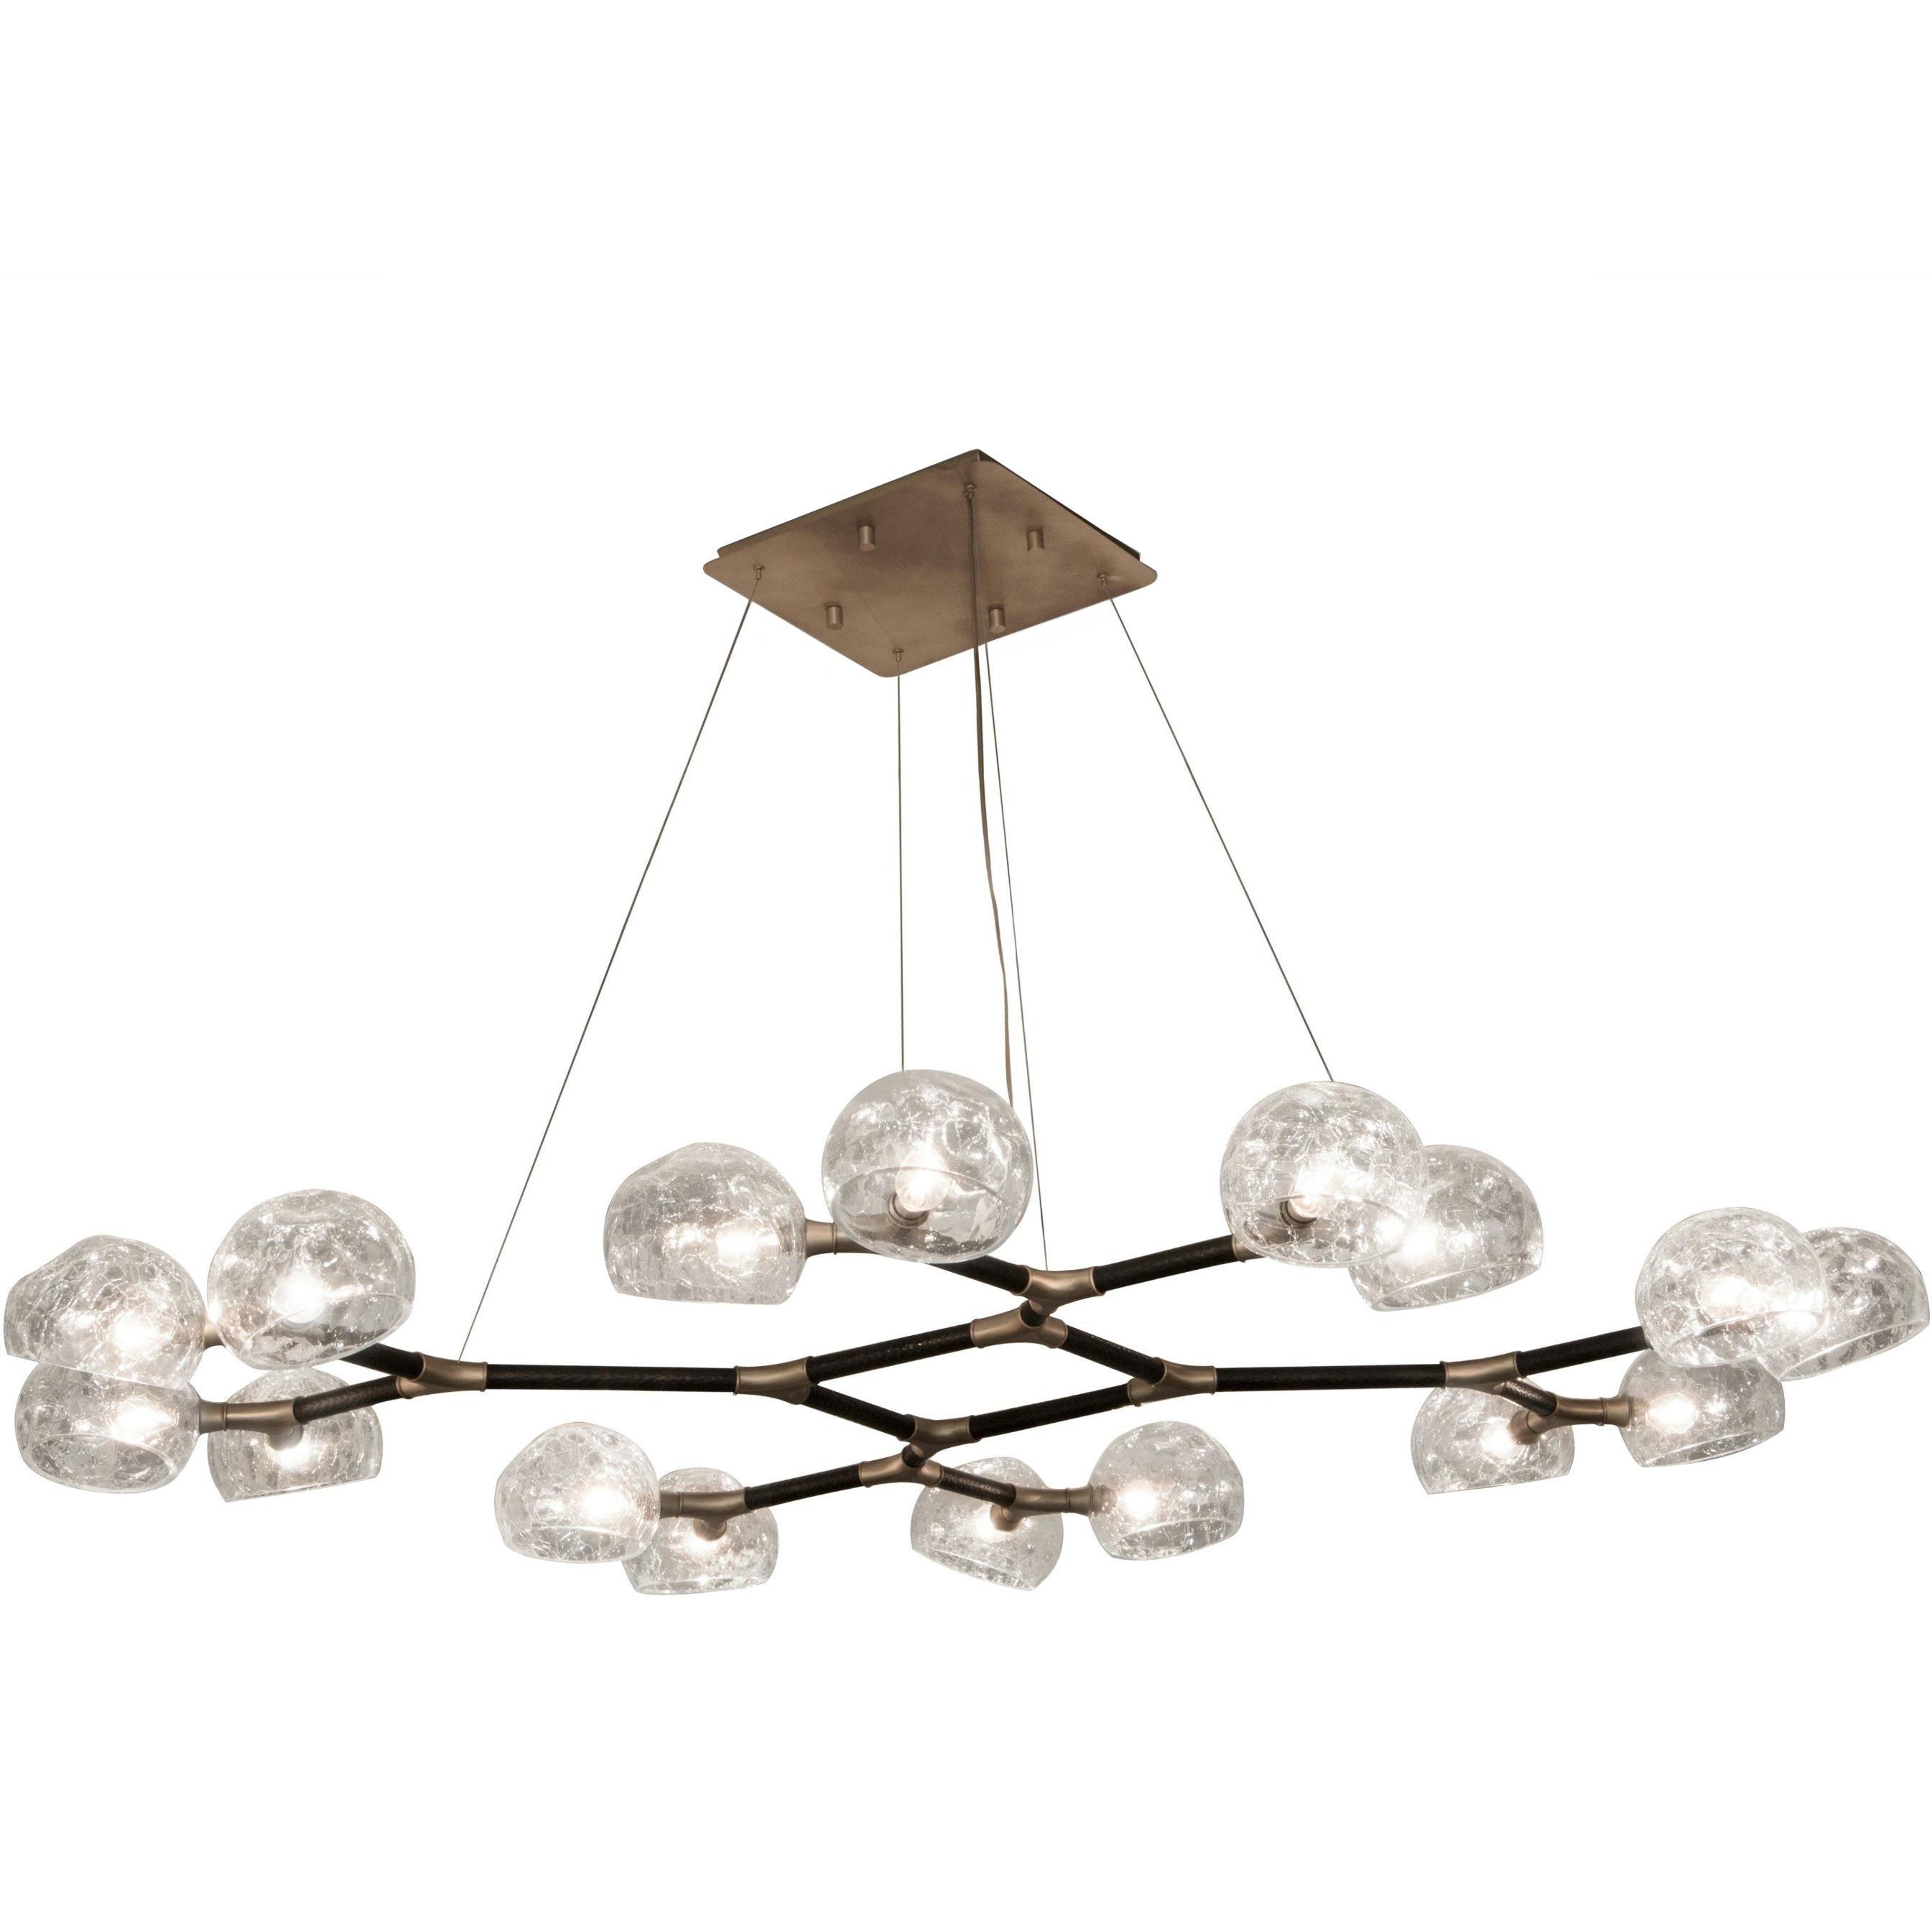 Just like the God of the sky and the rising sun, HORUS Glass Suspension Light II promises to be a reference in modern interior design. Featuring a structure in matte black lacquered brass and shades in matte brass, this chandelier is perfect for